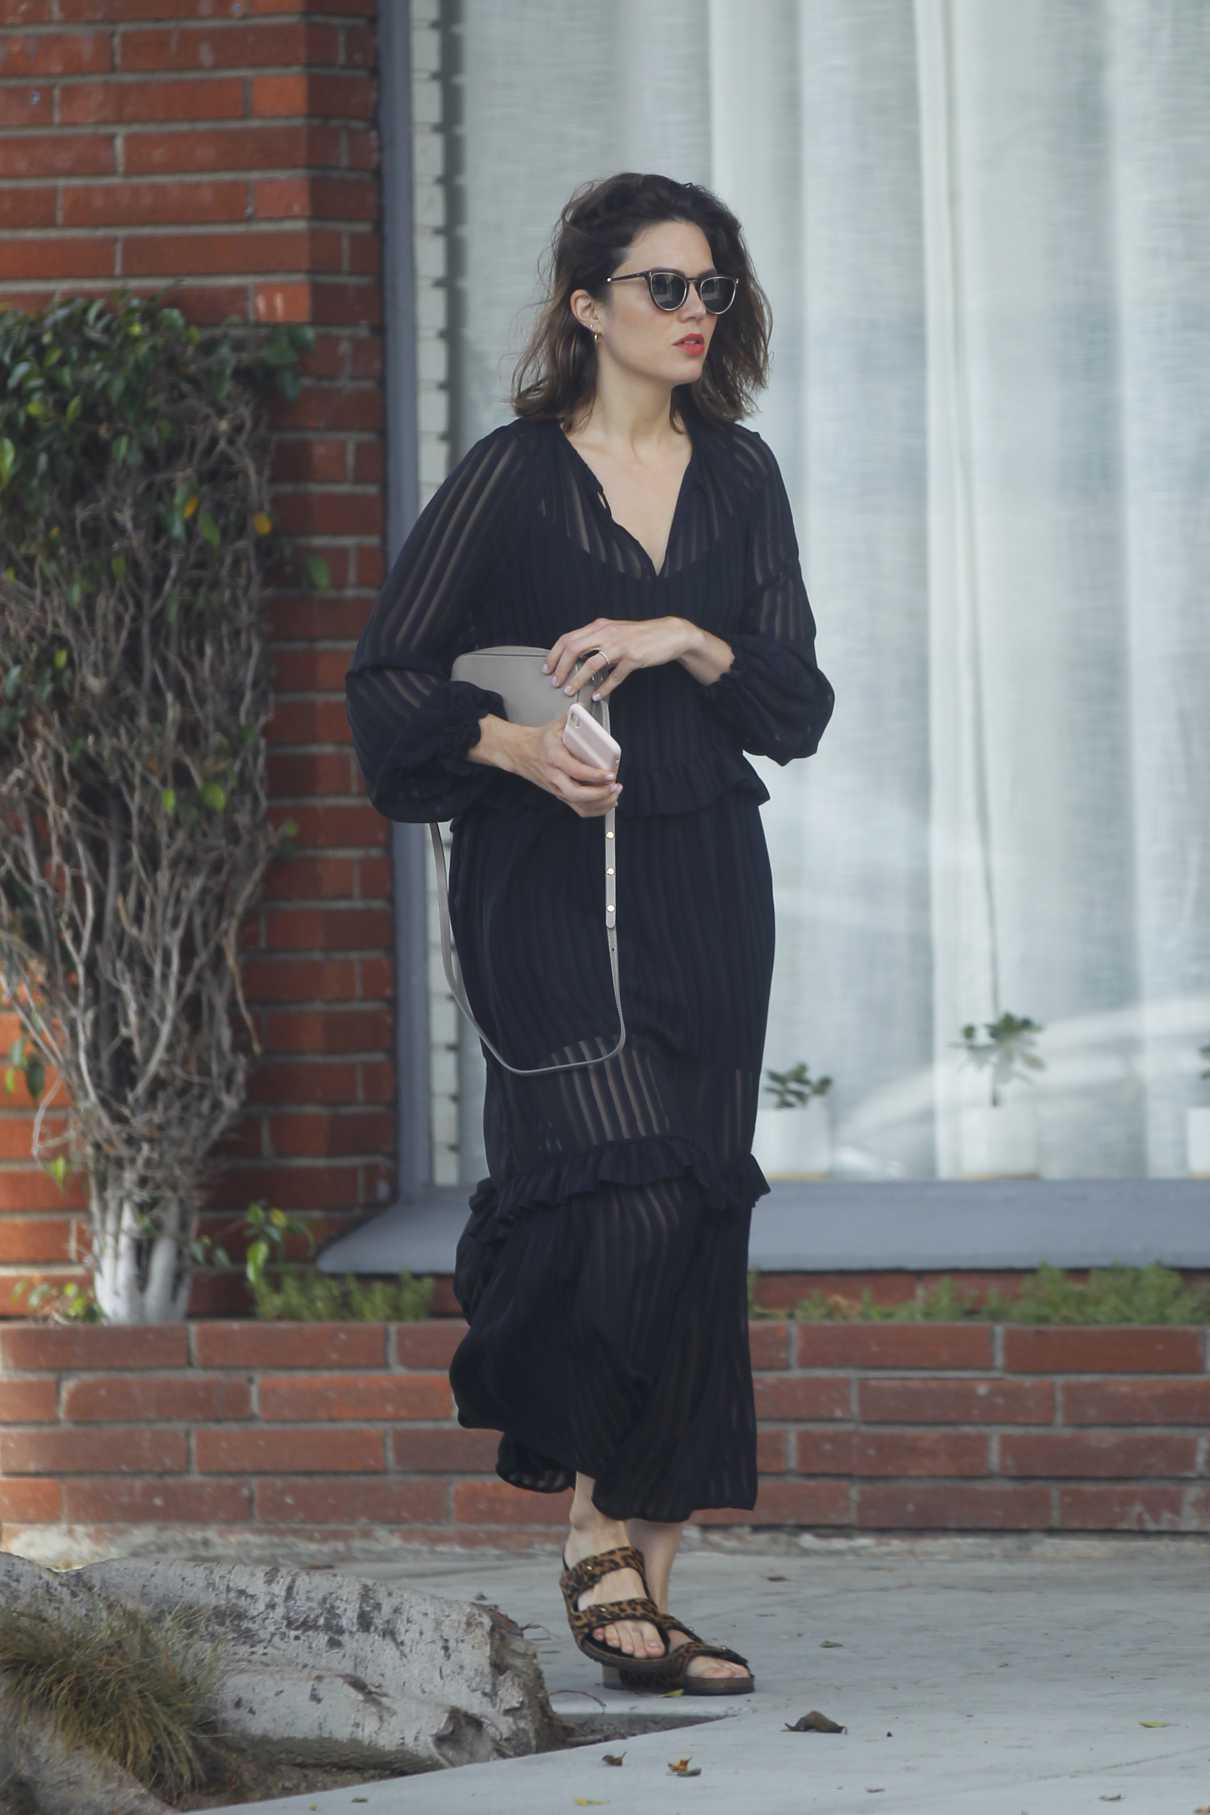 Mandy Moore in a Black Dress Was Seen Out in Los Angeles 09/17/2019 ...